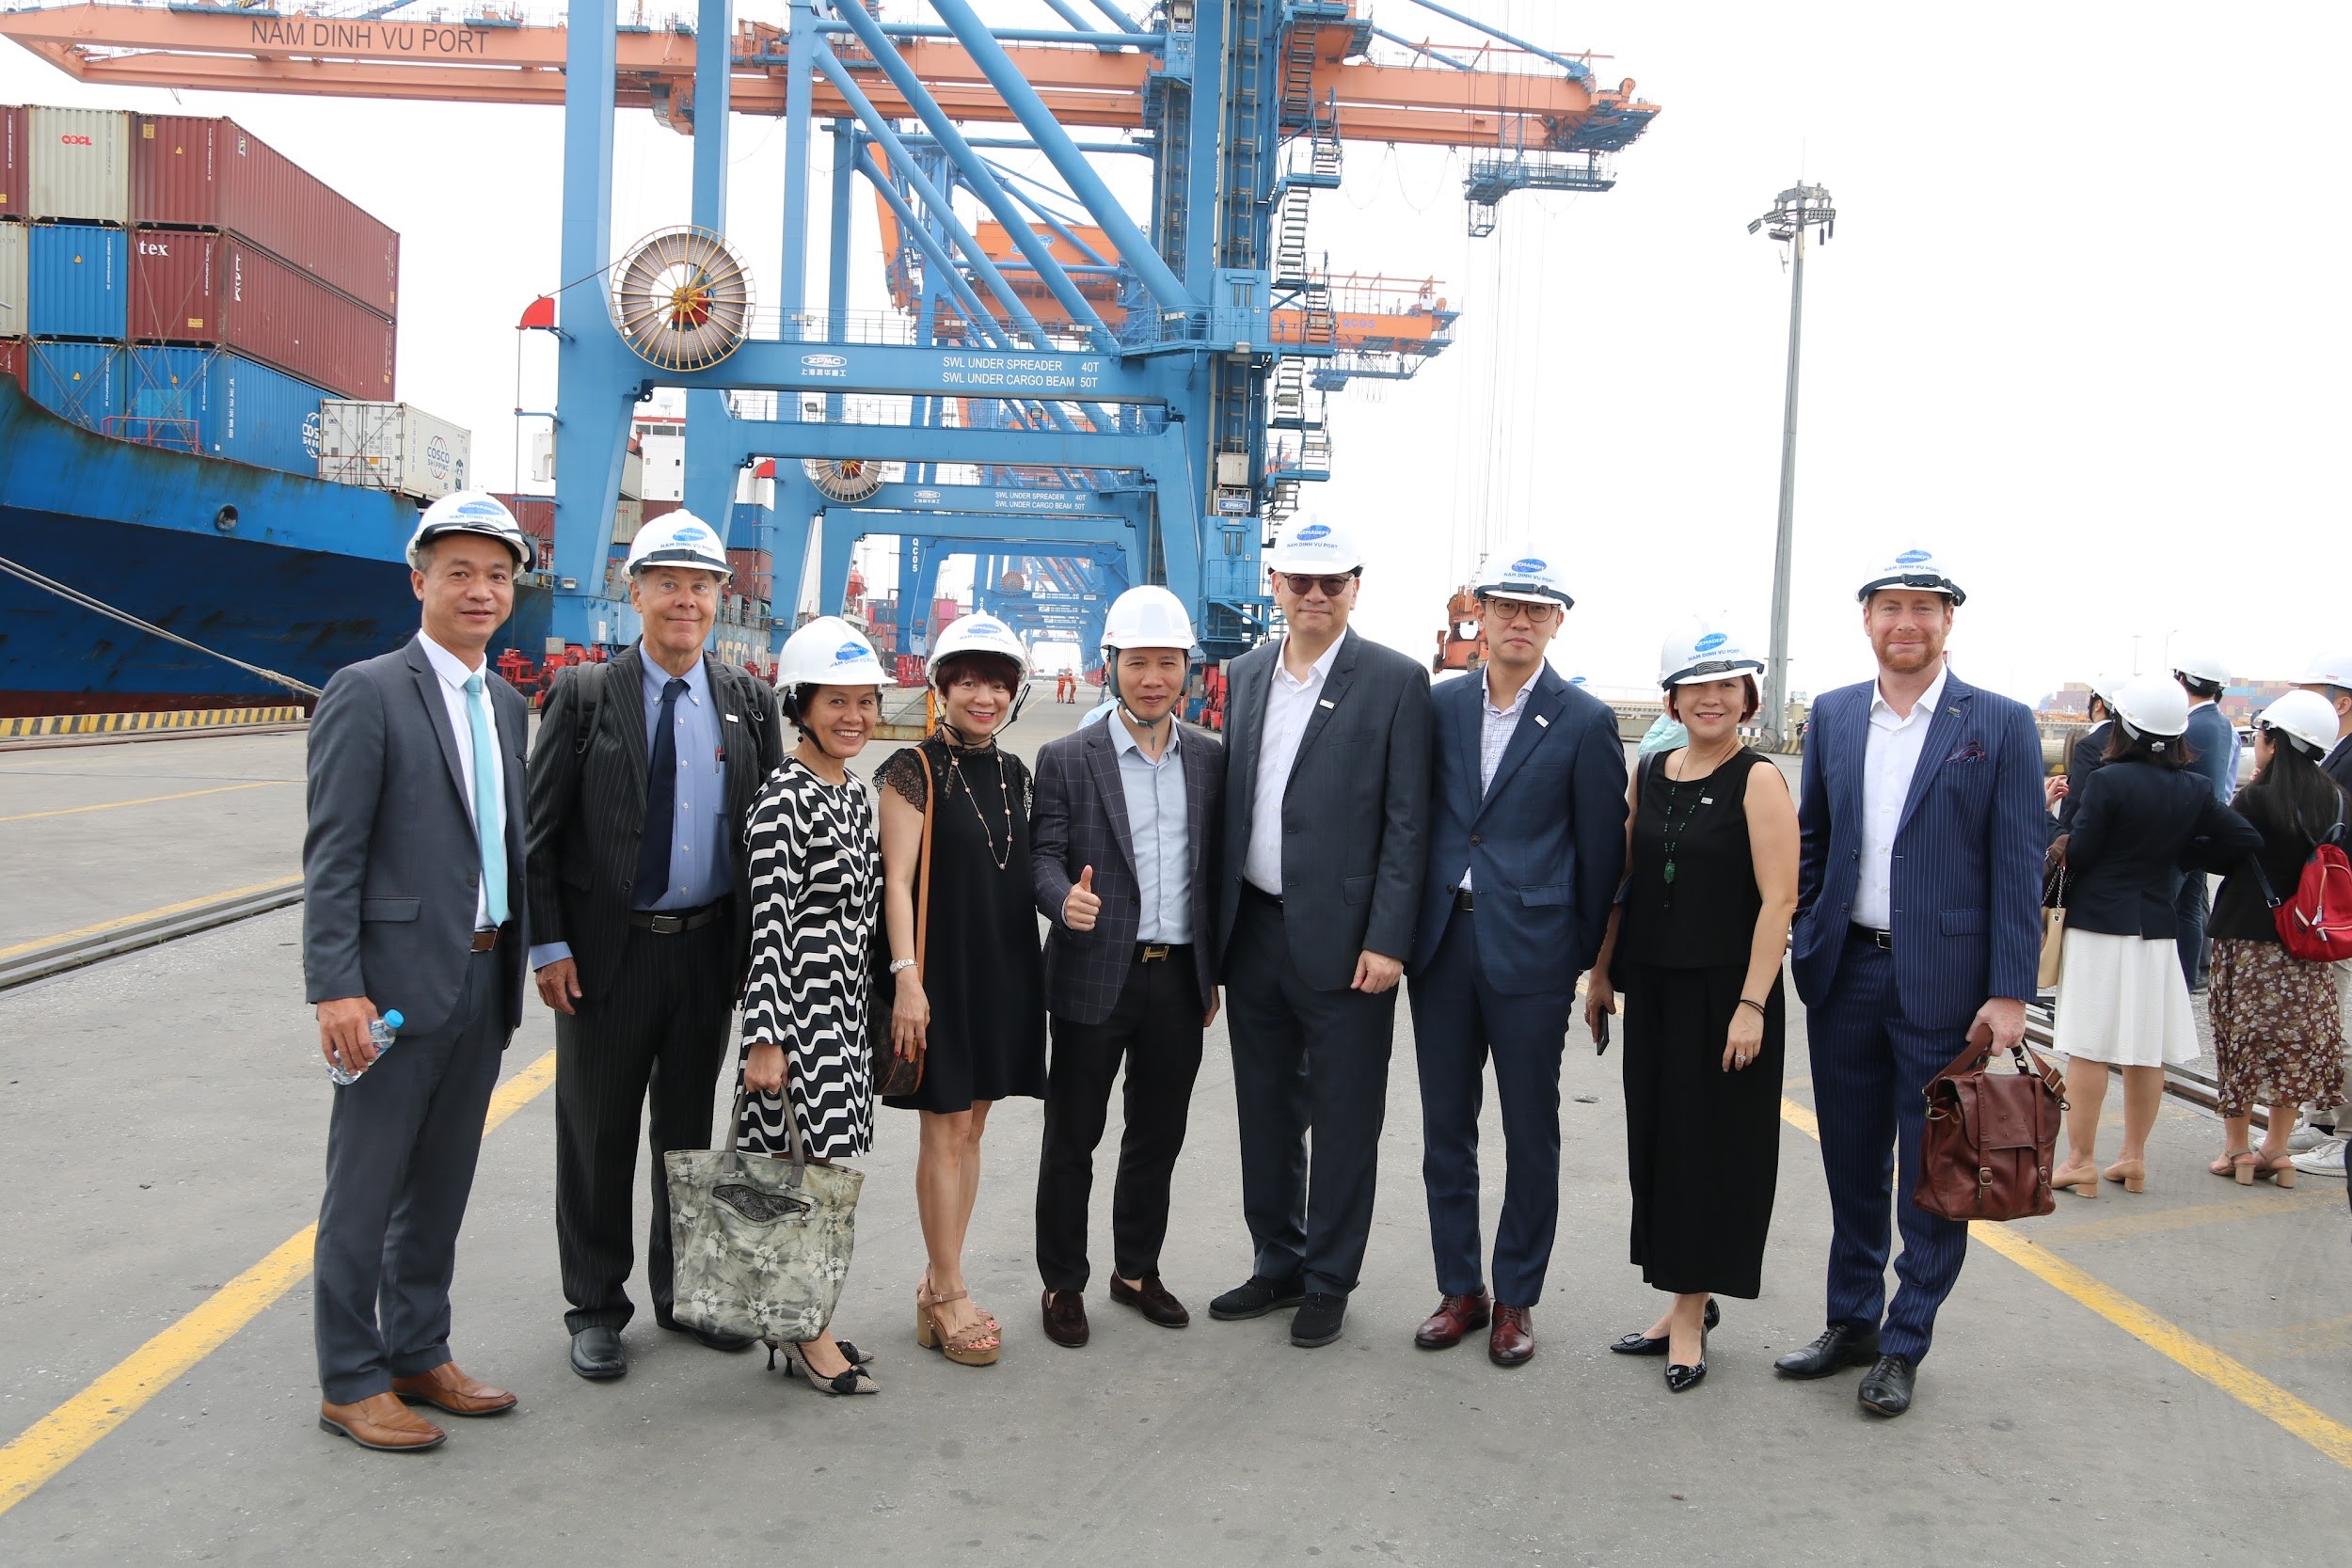 Hong Kong business delegation group take photos with members of Sao Do Group when visiting Nam Dinh Vu port